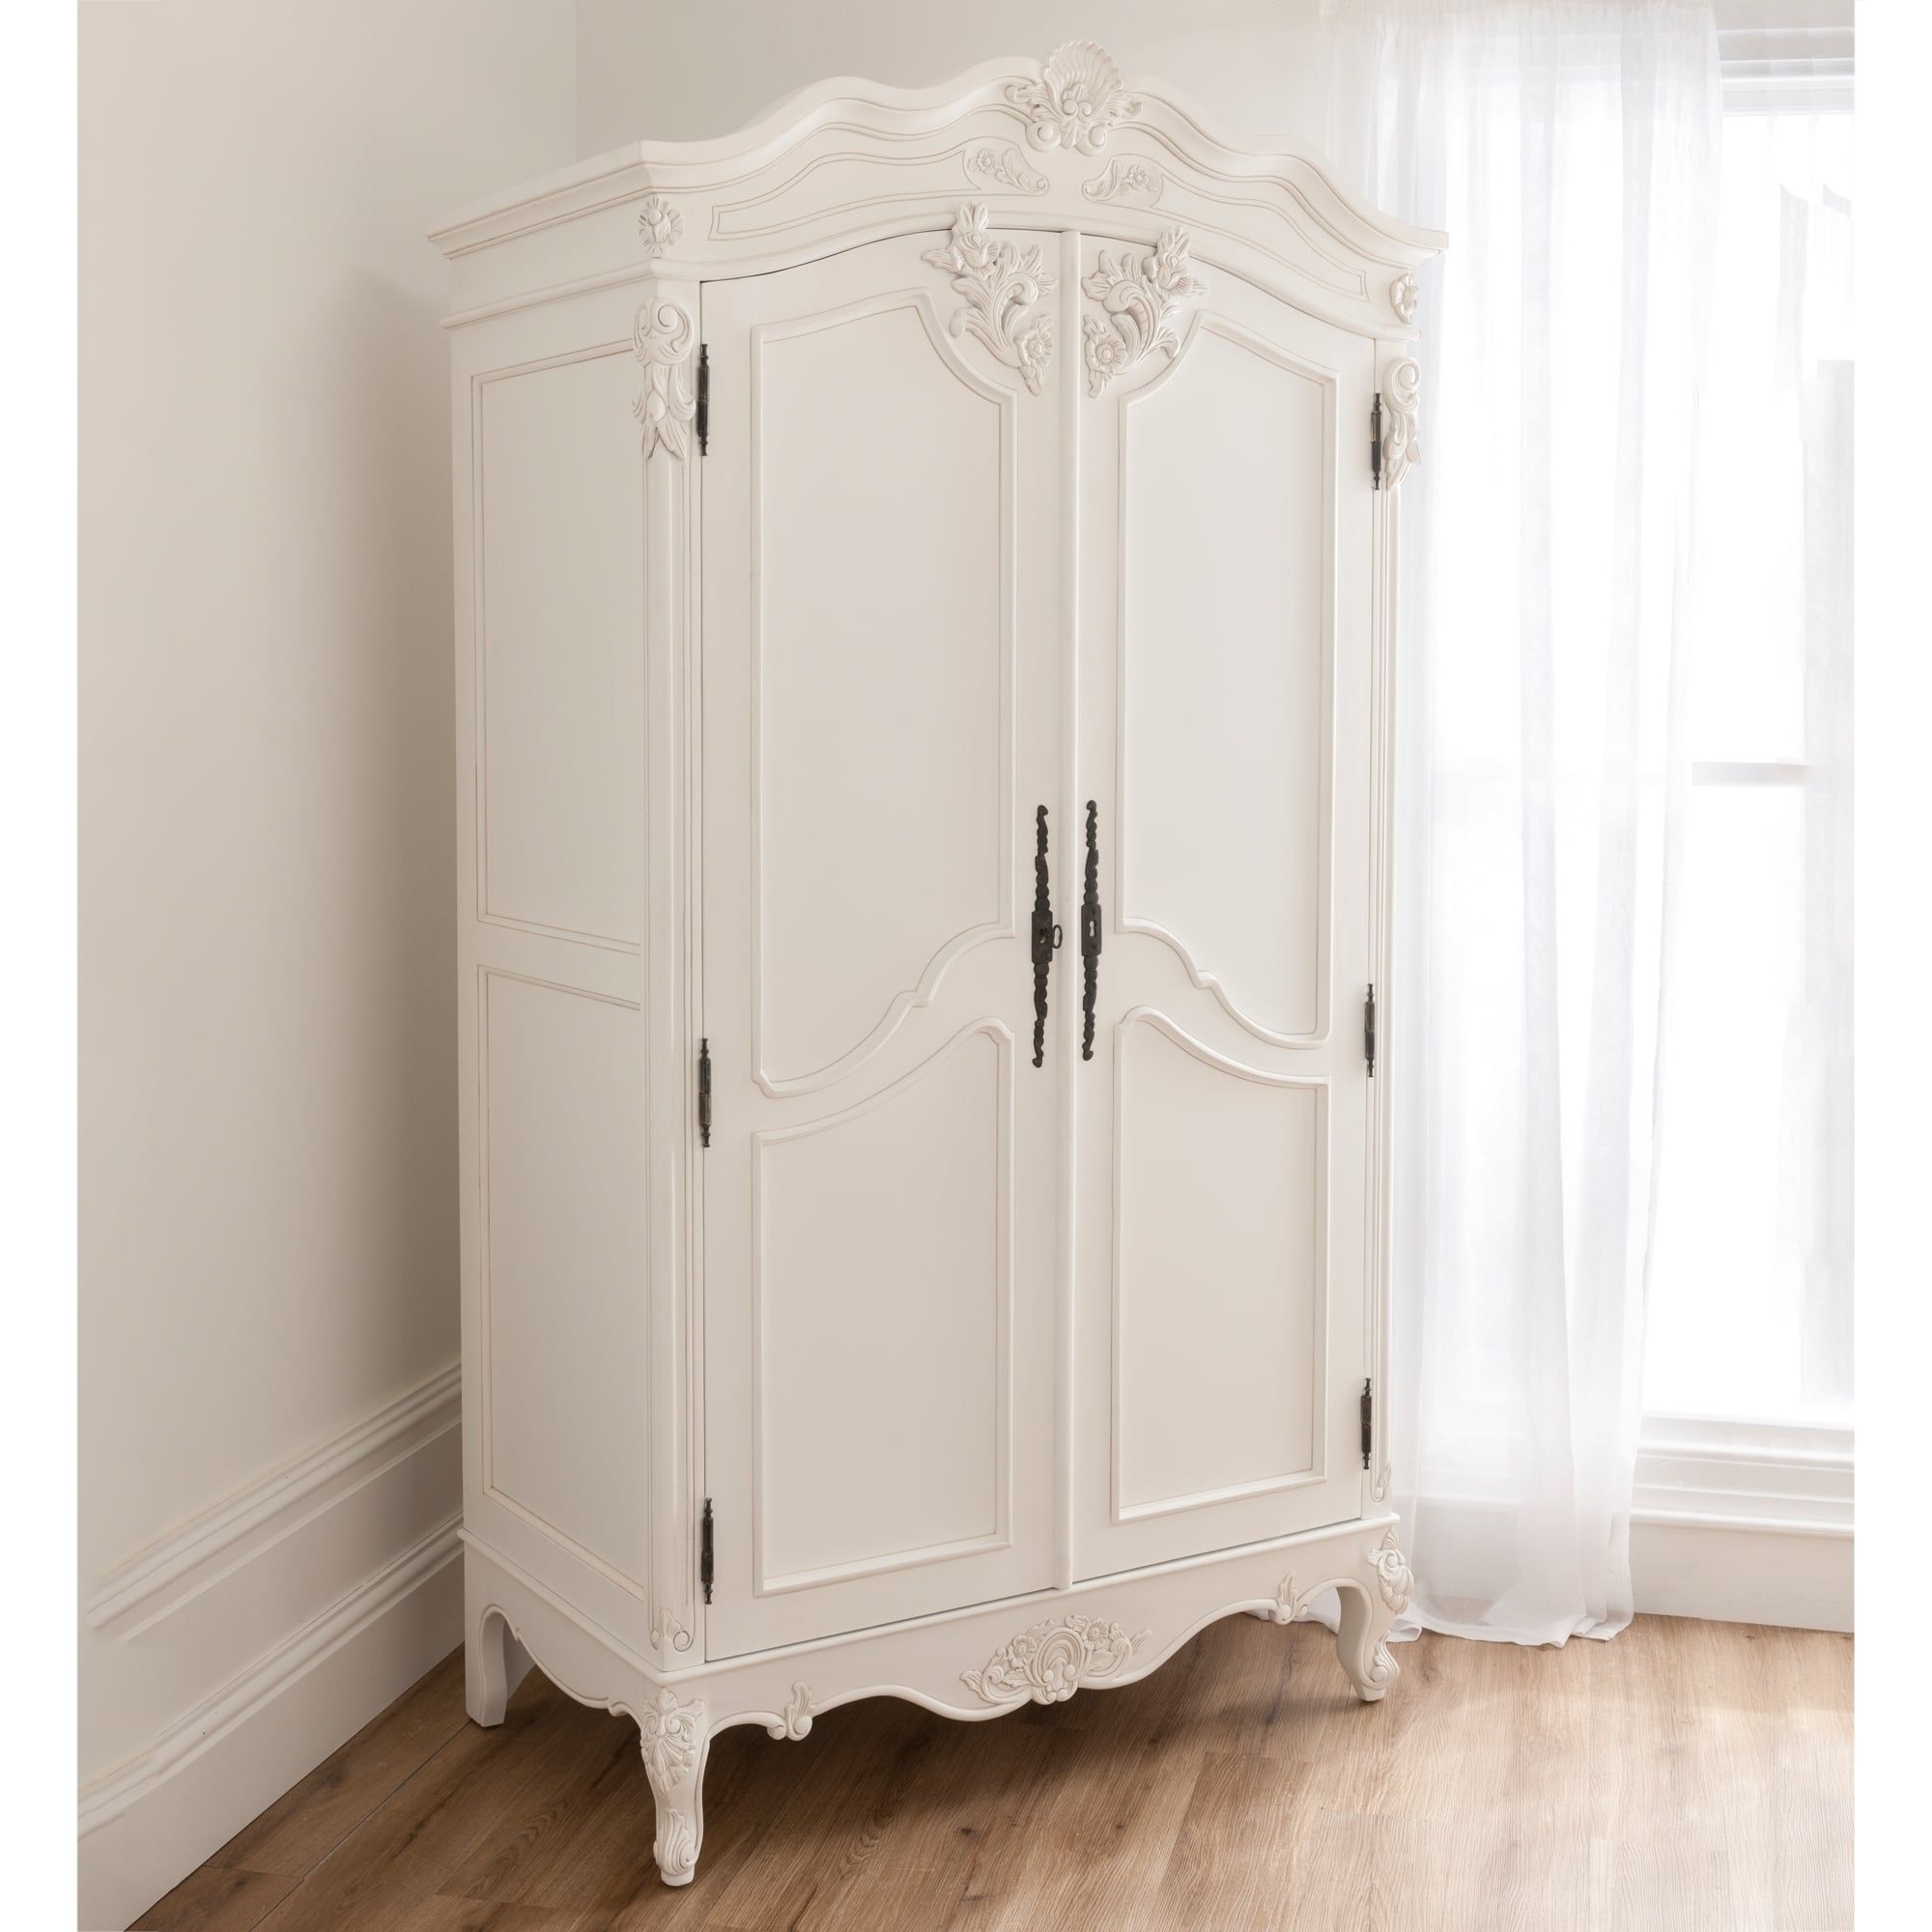 Well Known French Style Wardrobes With Baroque Antique French Wardrobe Is Available Online From (View 7 of 15)